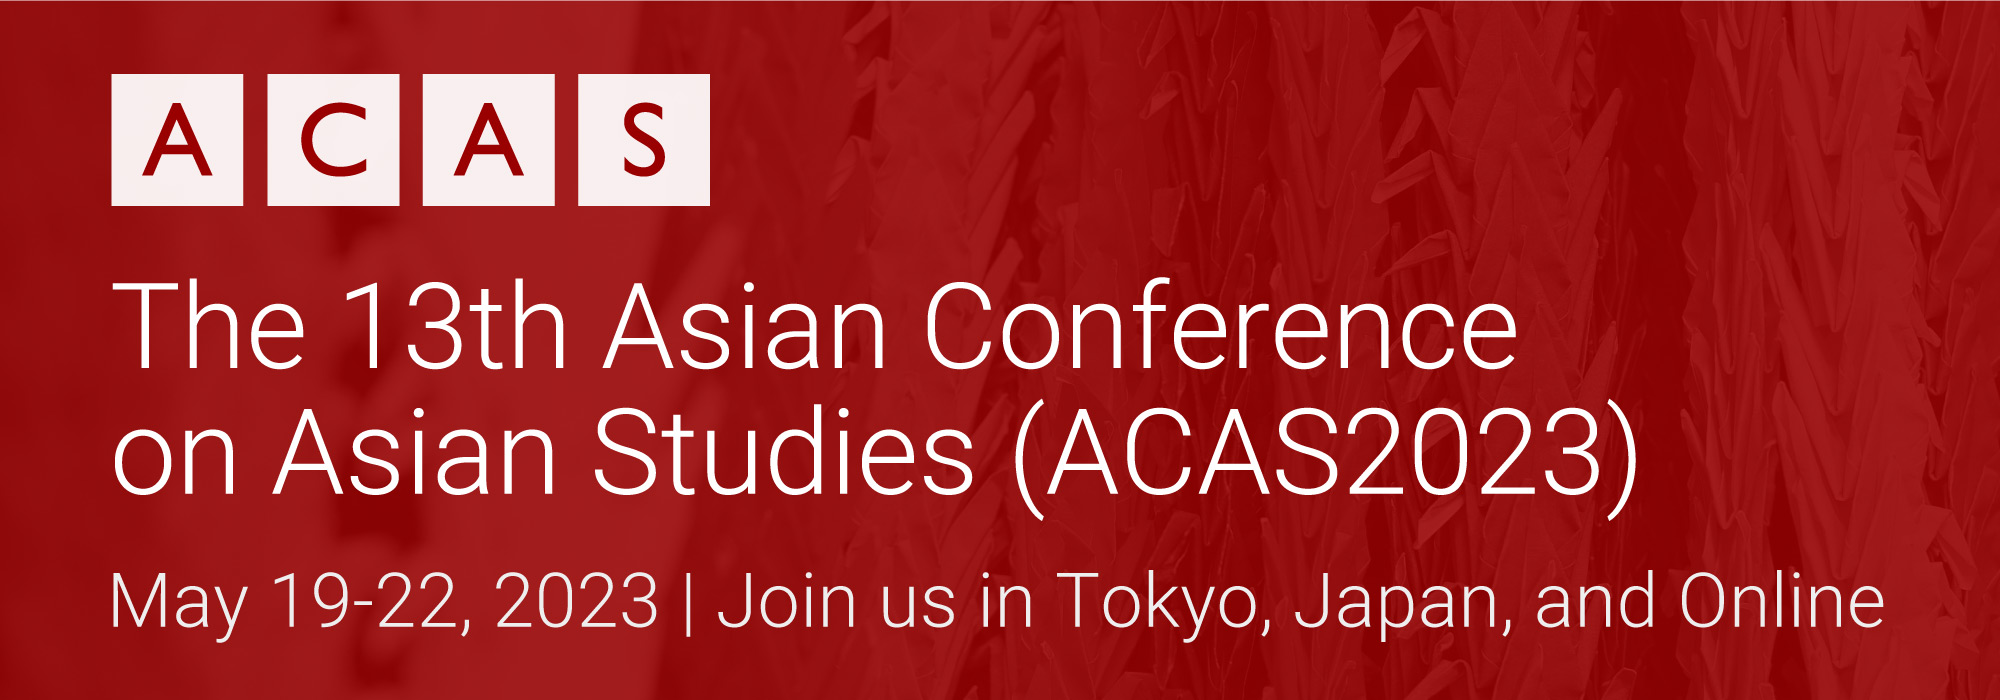 The 13th Asian Conference on Asian Studies ACAS2023 Logo